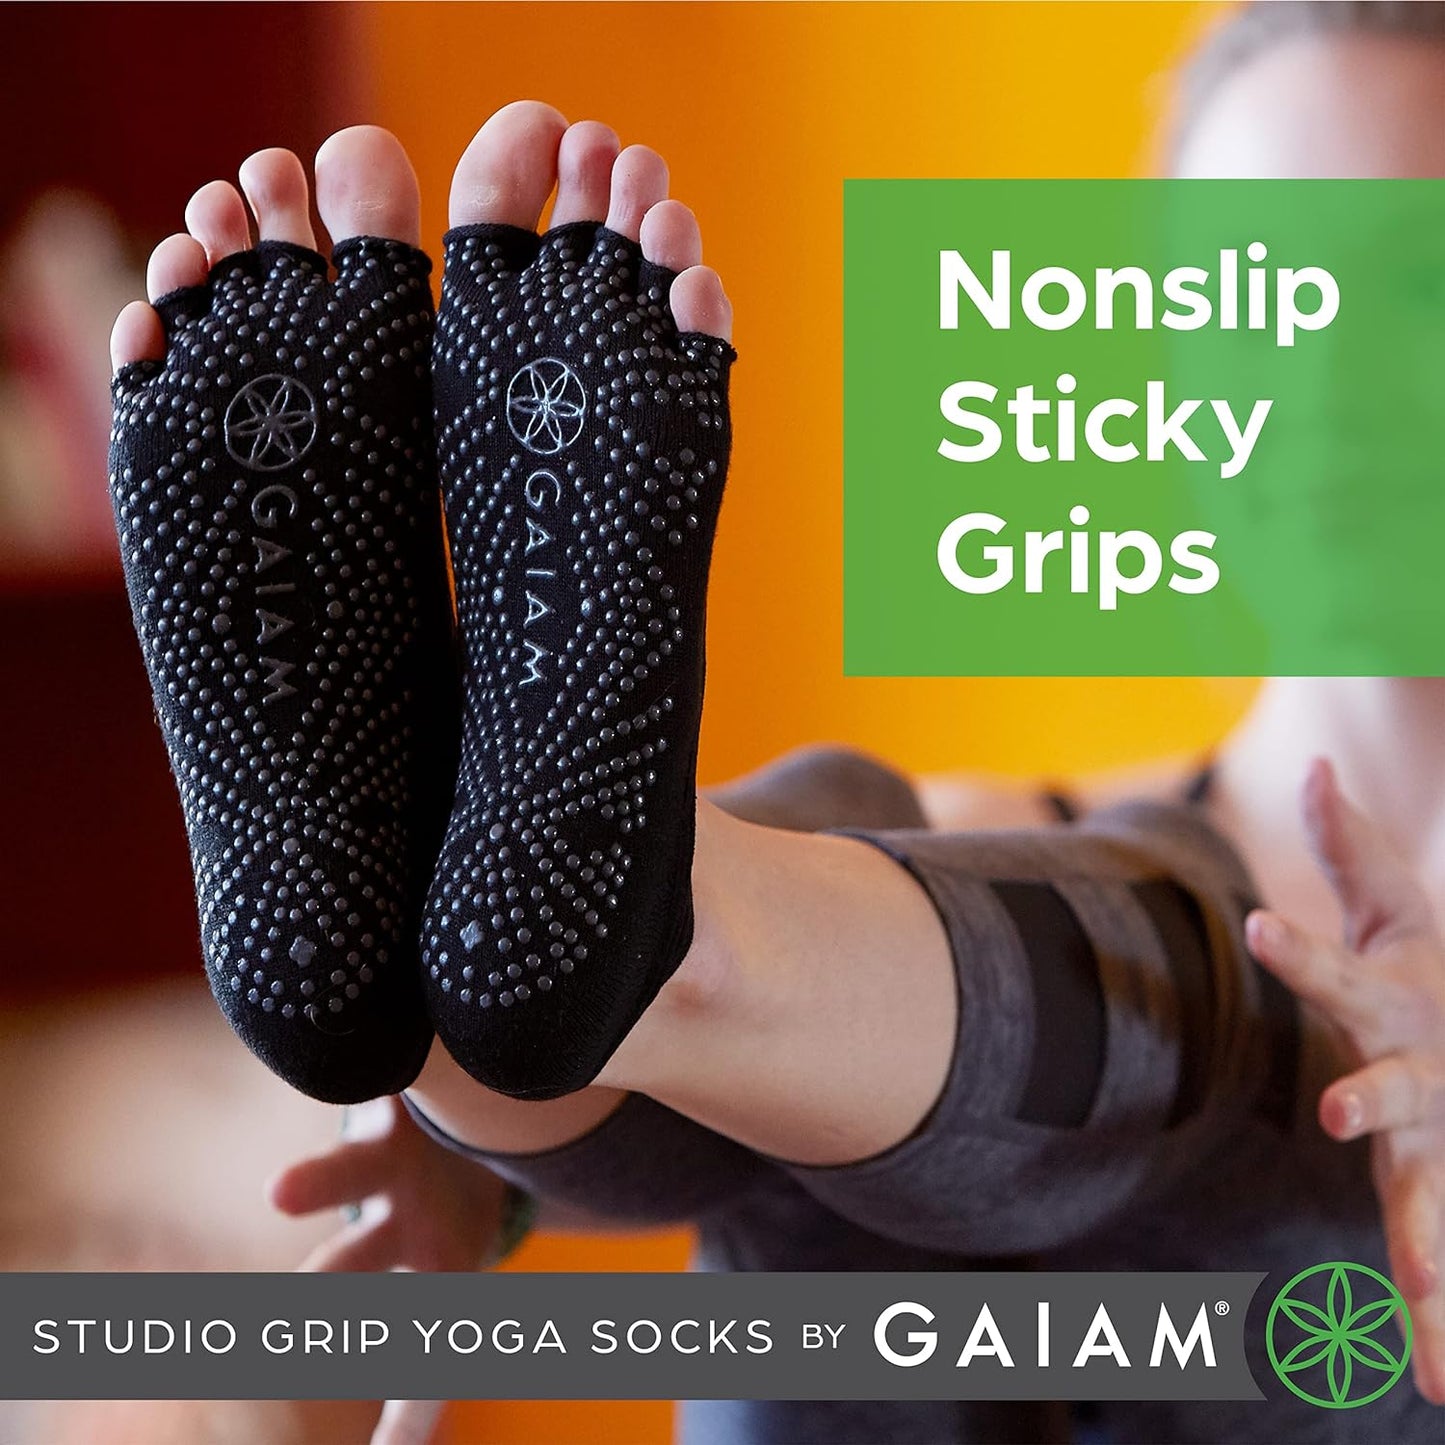 Grippy Studio Yoga Socks for Extra Grip in Standard or Hot Yoga, Barre, Pilates, Ballet or at Home for Added Balance and Stability, Black, Small-Medium, One Size